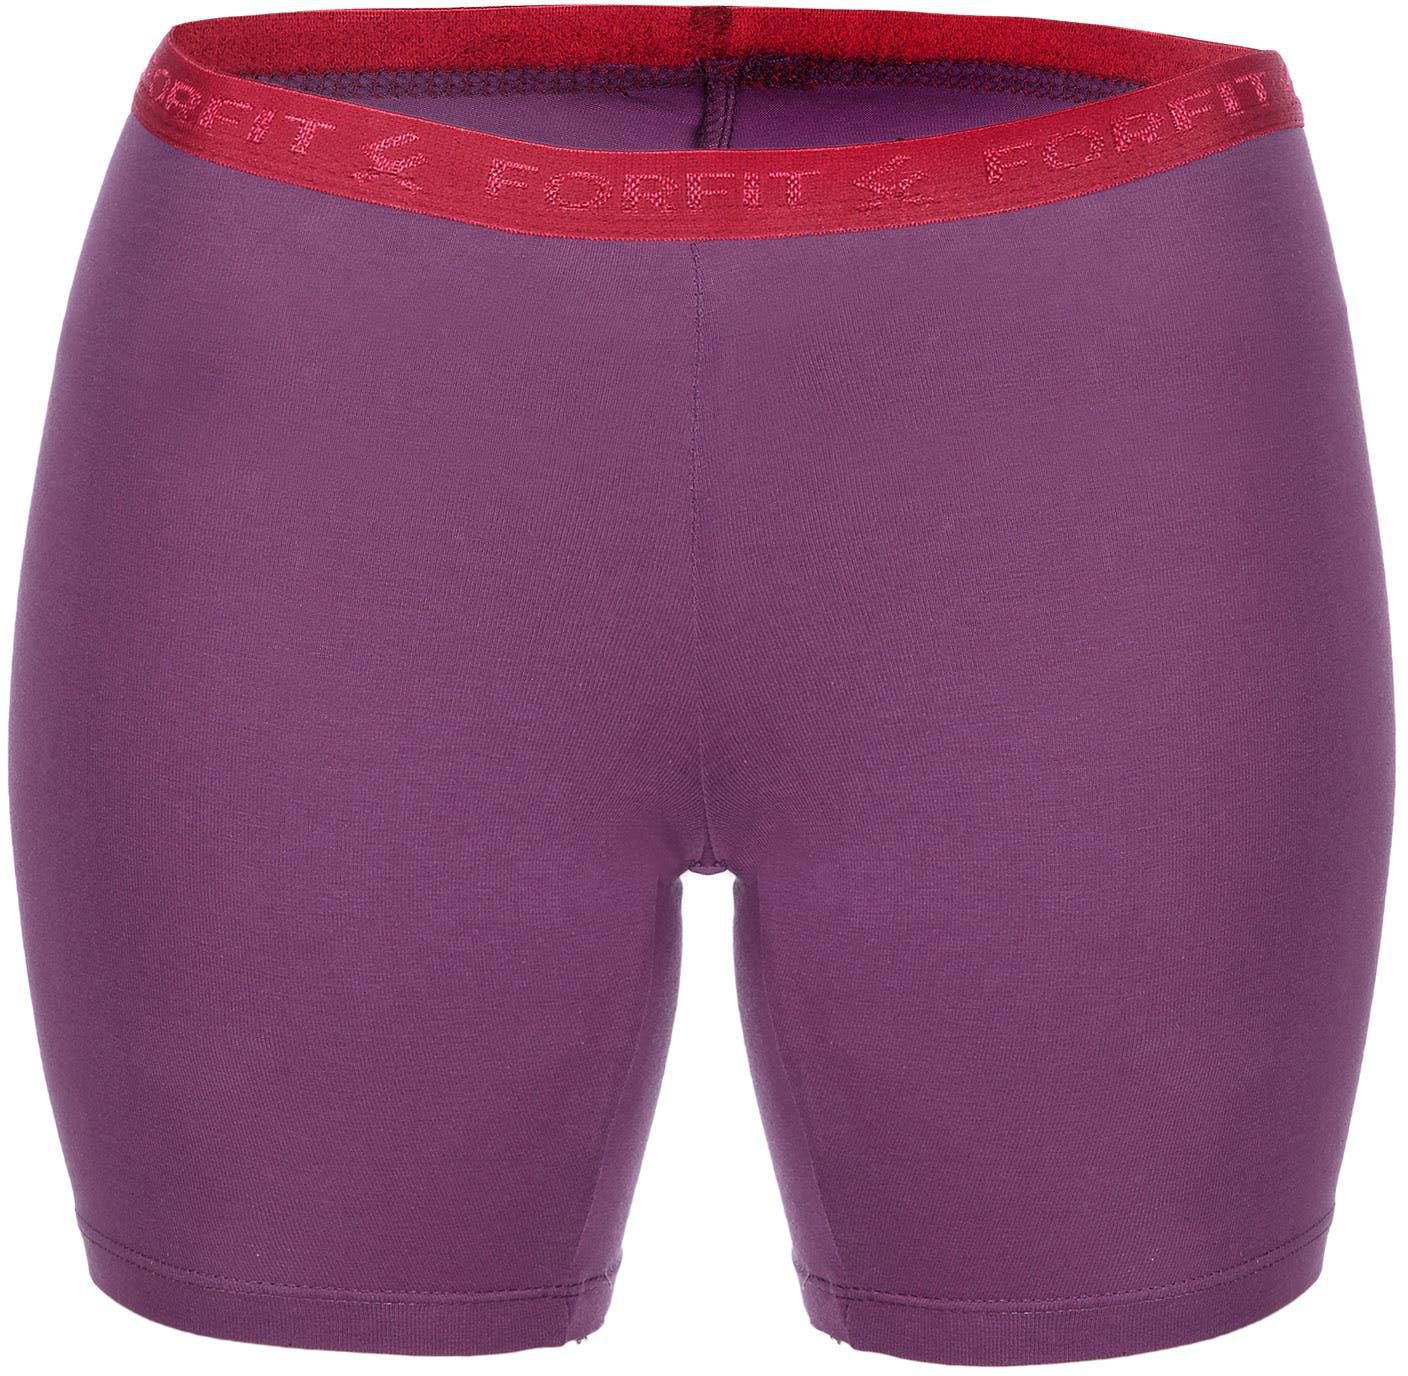 Get Forfit Lycra Hot Short for Girls, Size 12 - Purple with best offers | Raneen.com